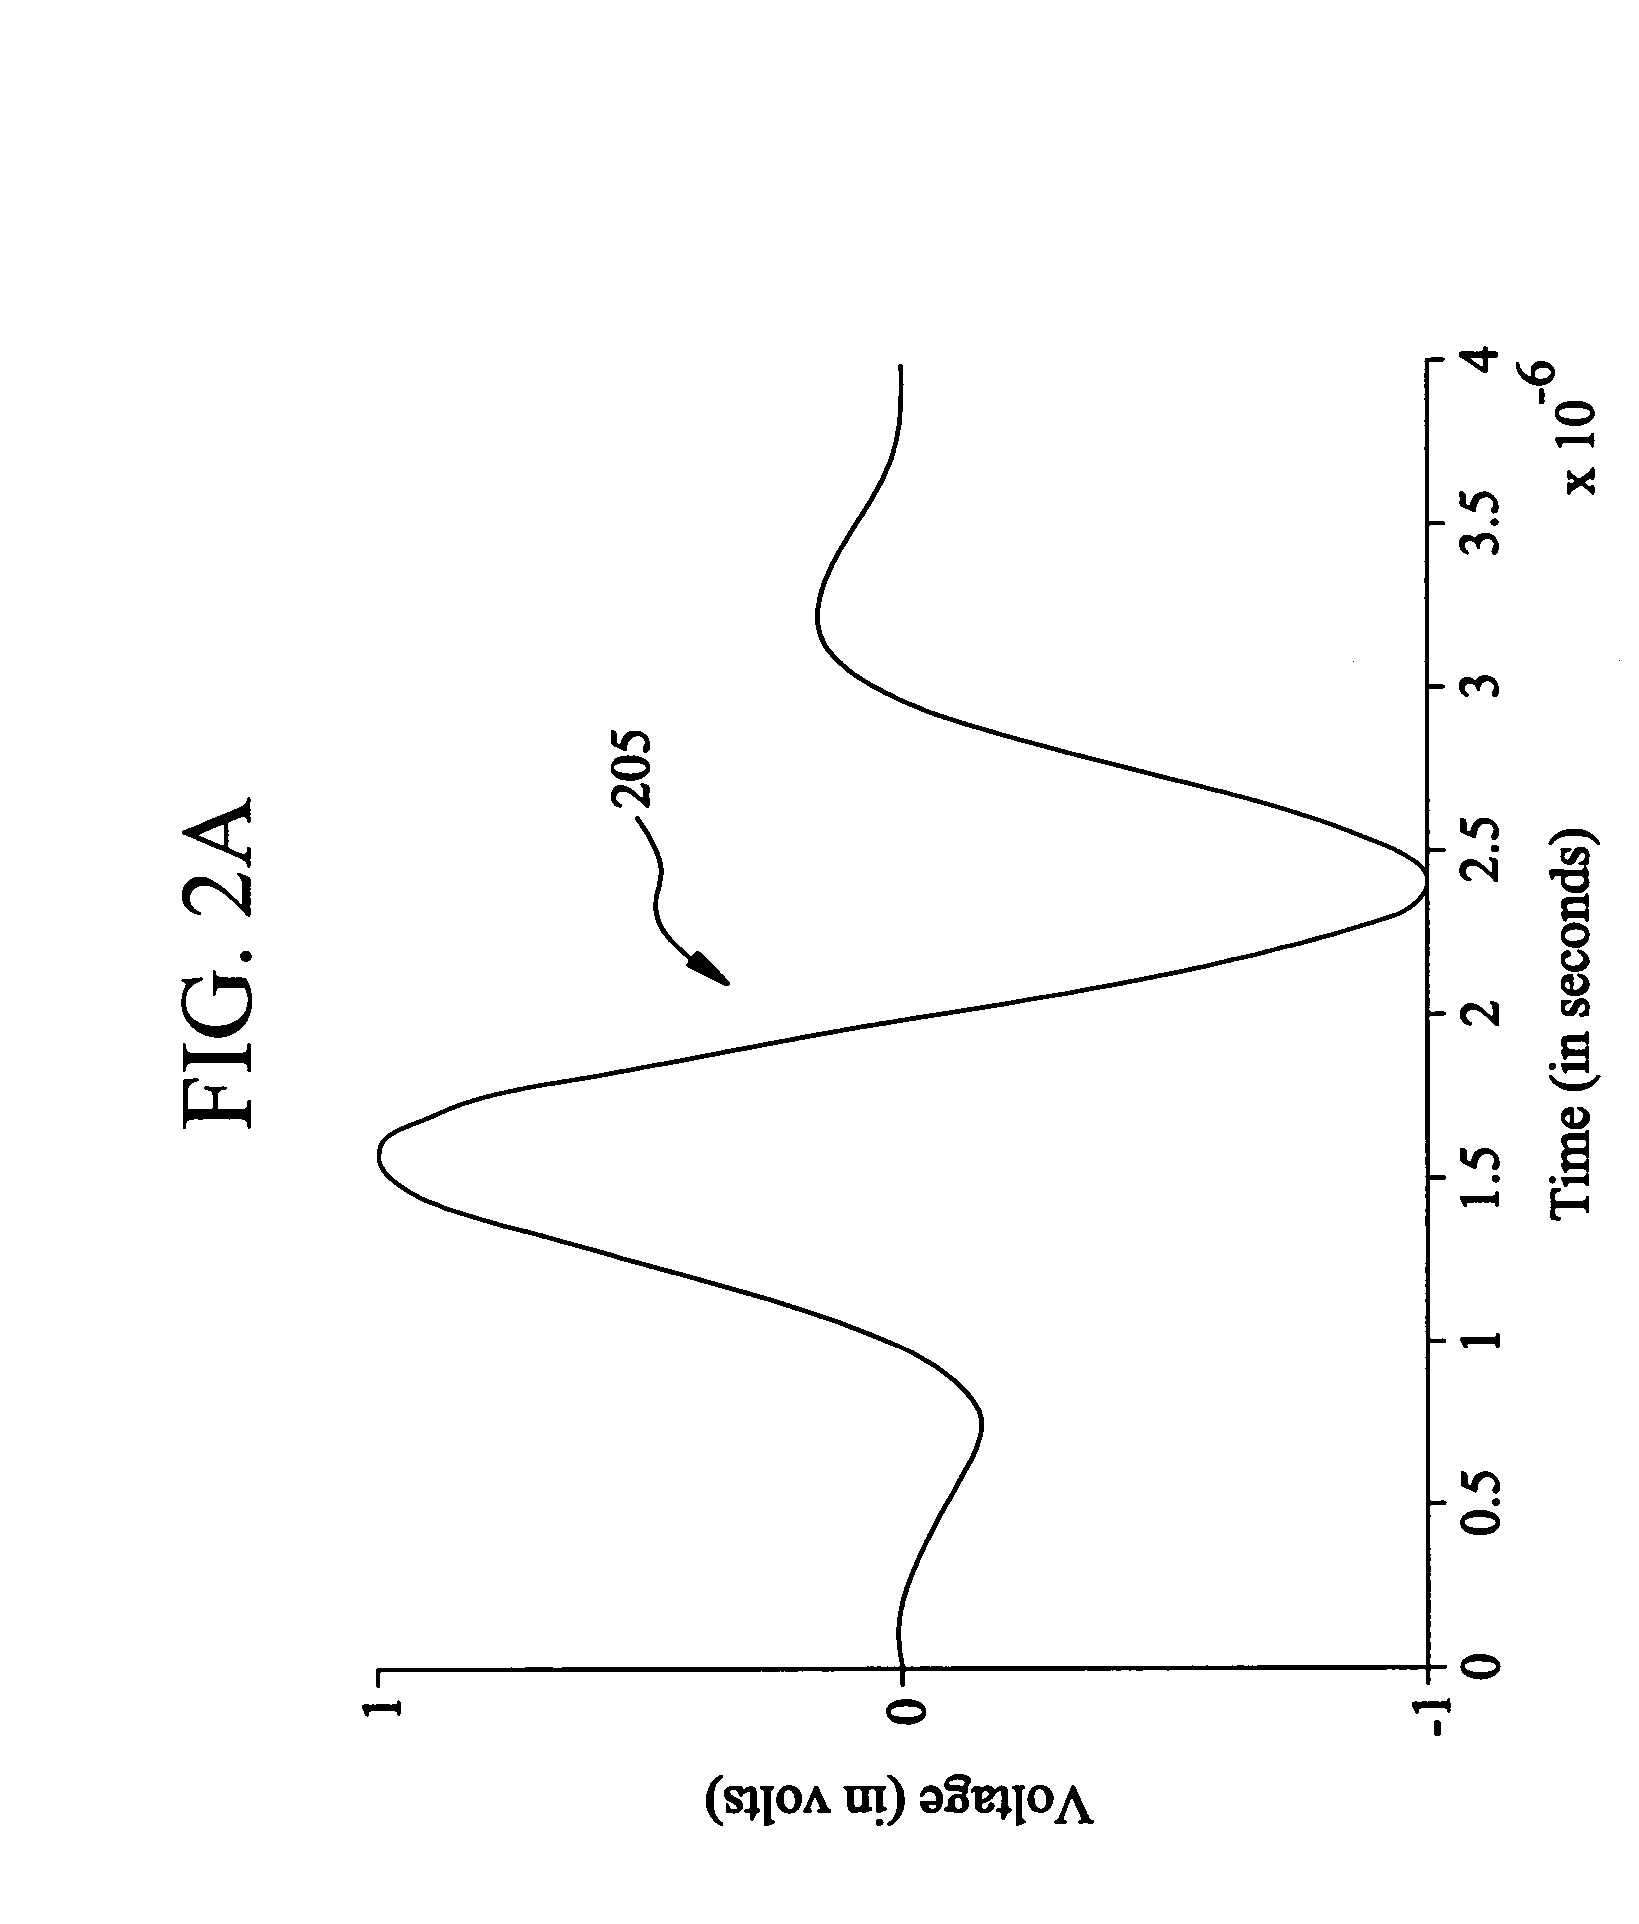 System and method for locating and determining discontinuities and estimating loop loss in a communications medium using frequency domain